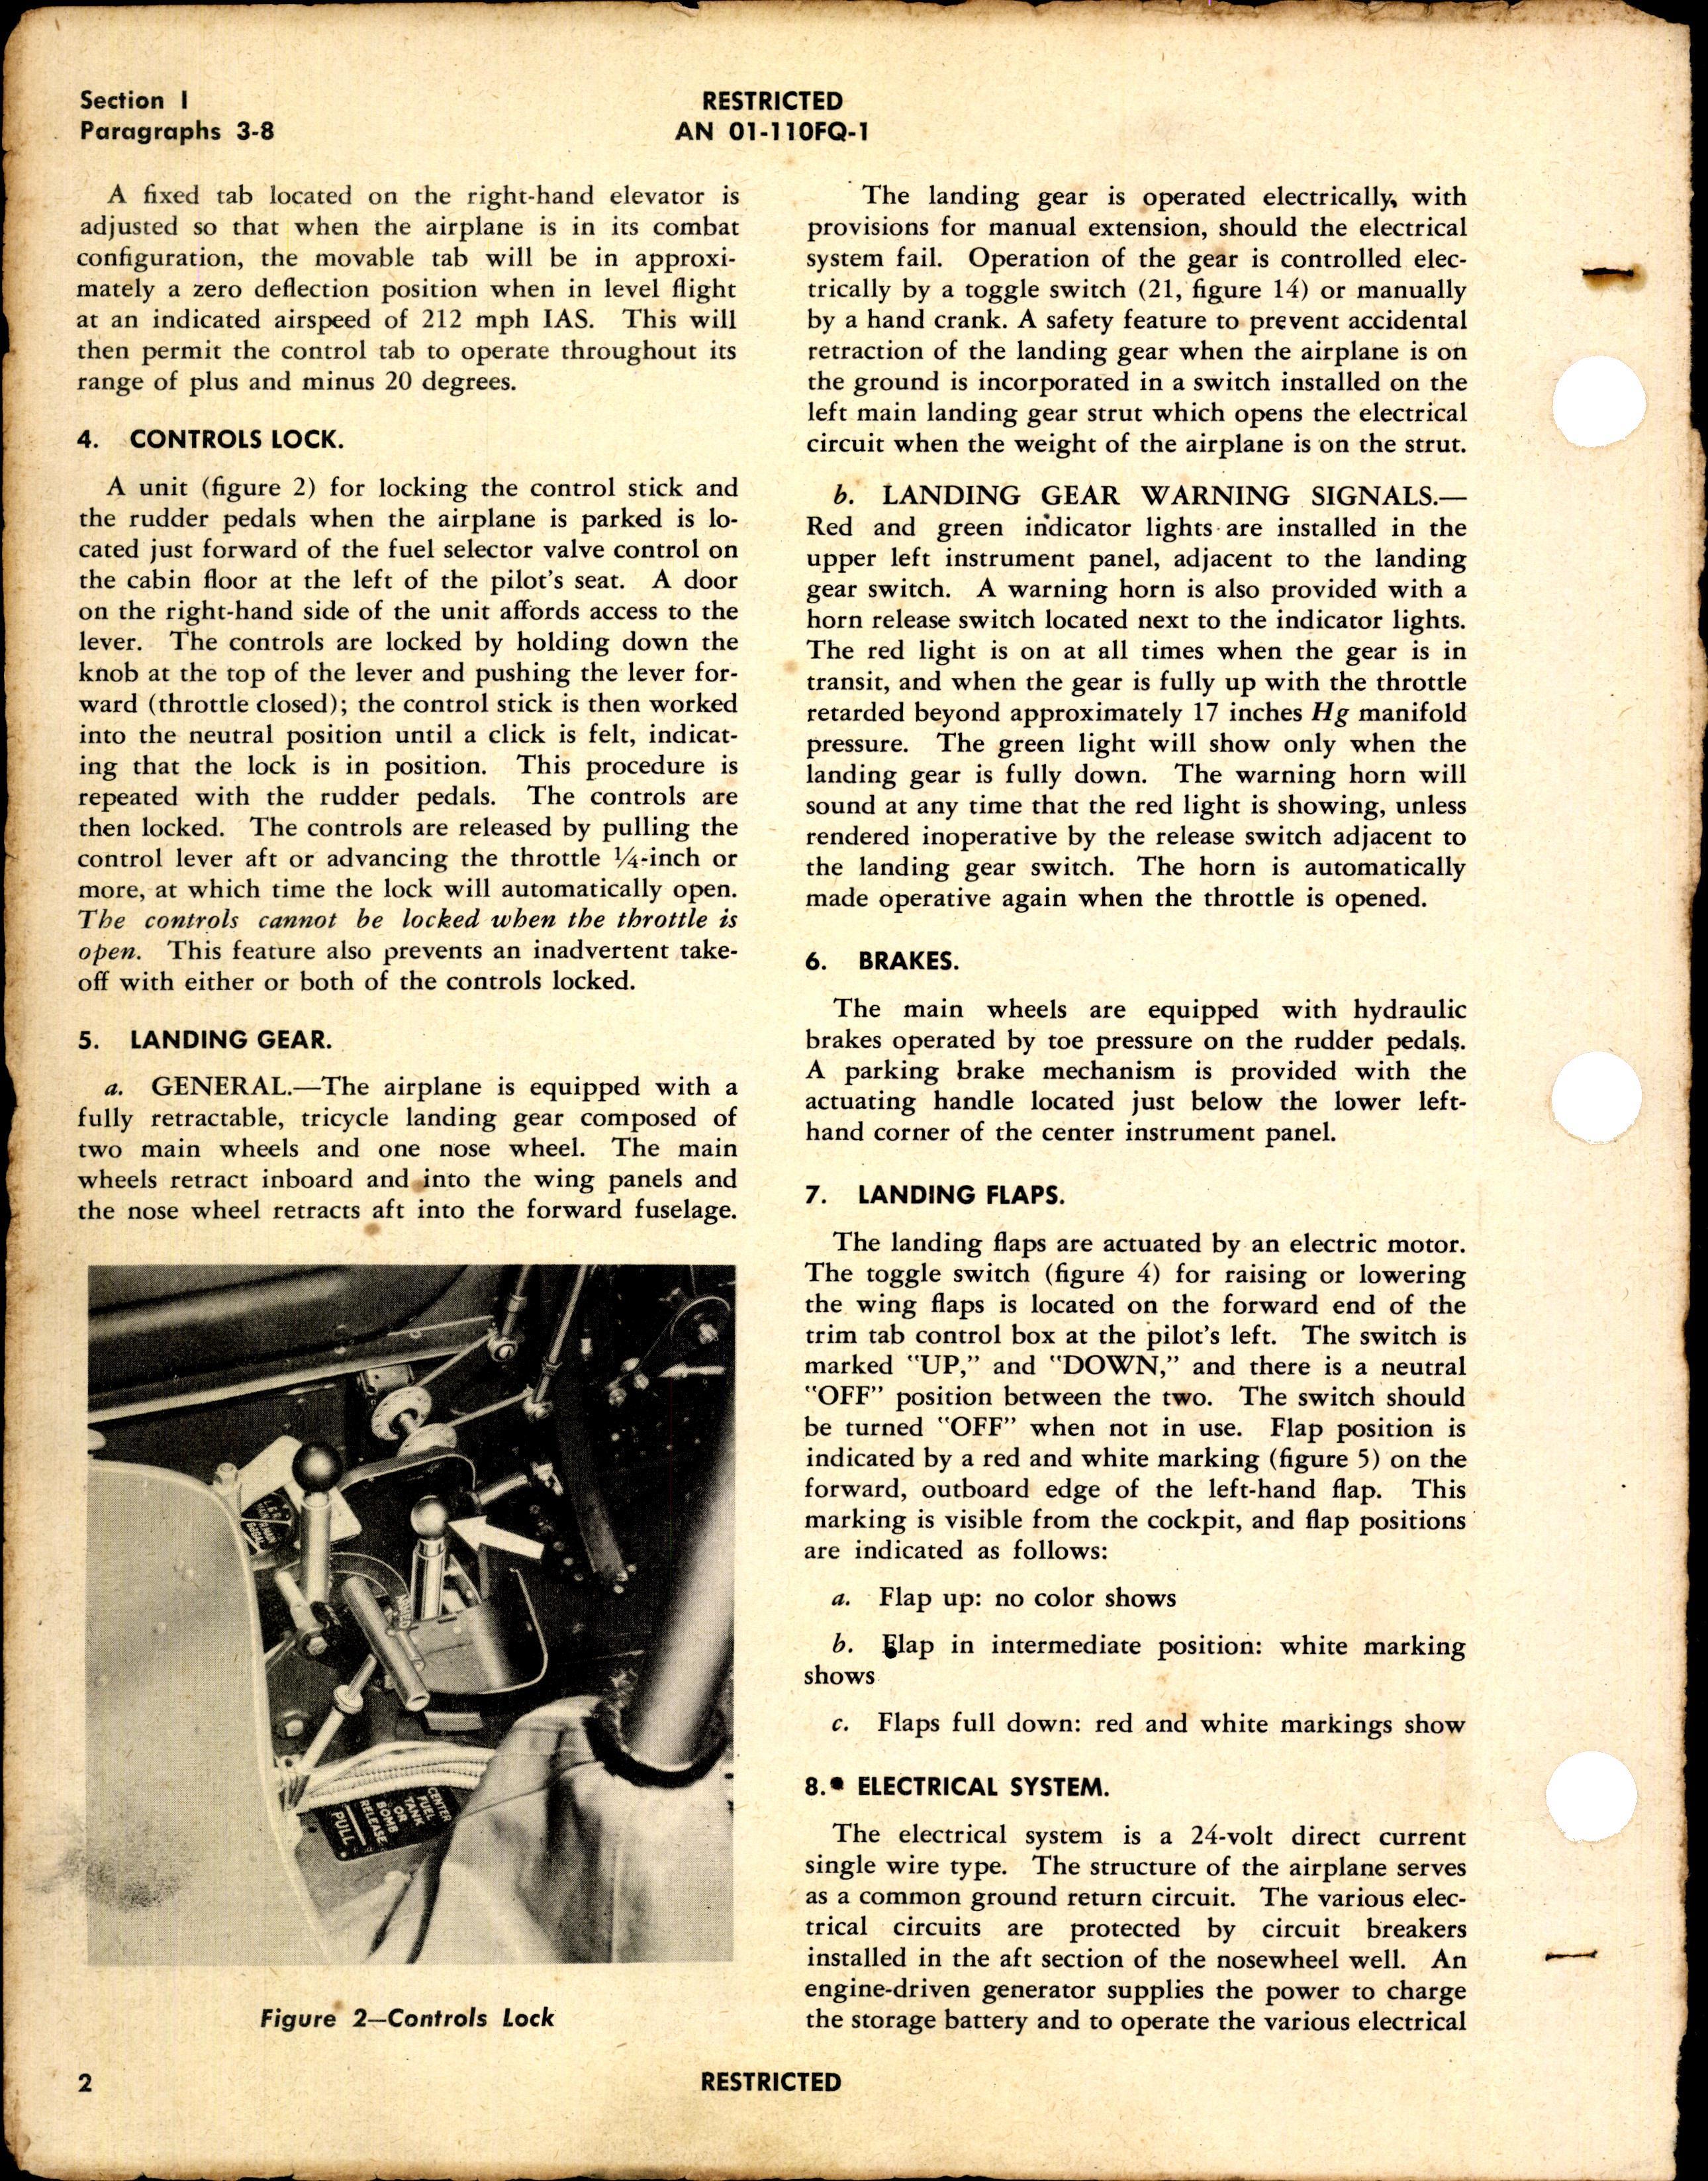 Sample page 6 from AirCorps Library document: Pilot's Flight Operating Instructions for P-63C Airplane